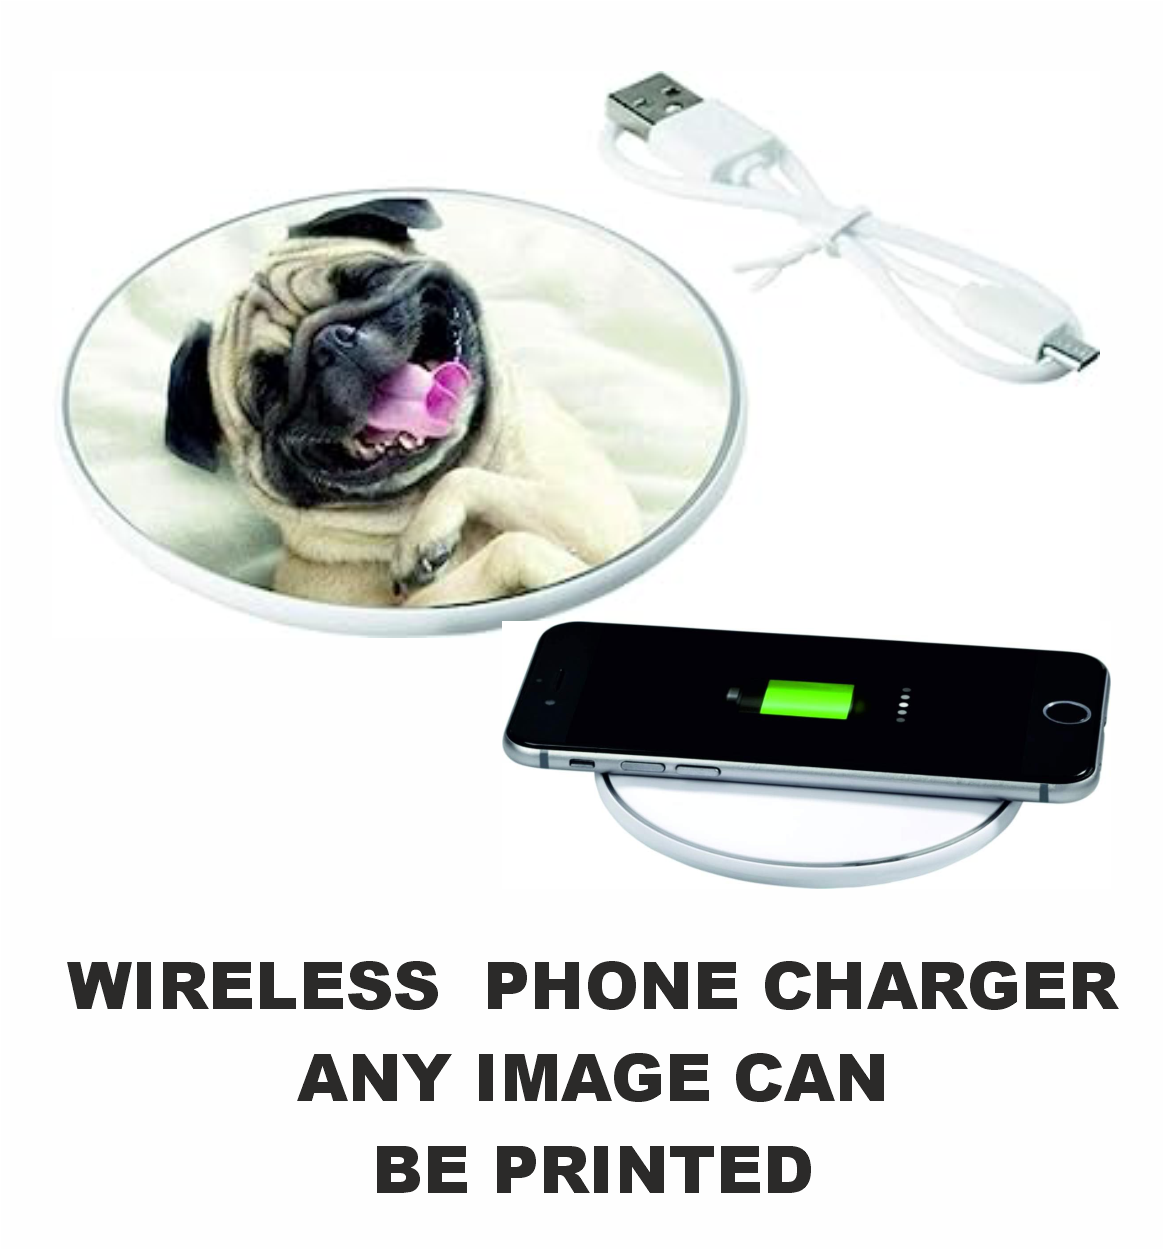 Personalised wireless phone charger 